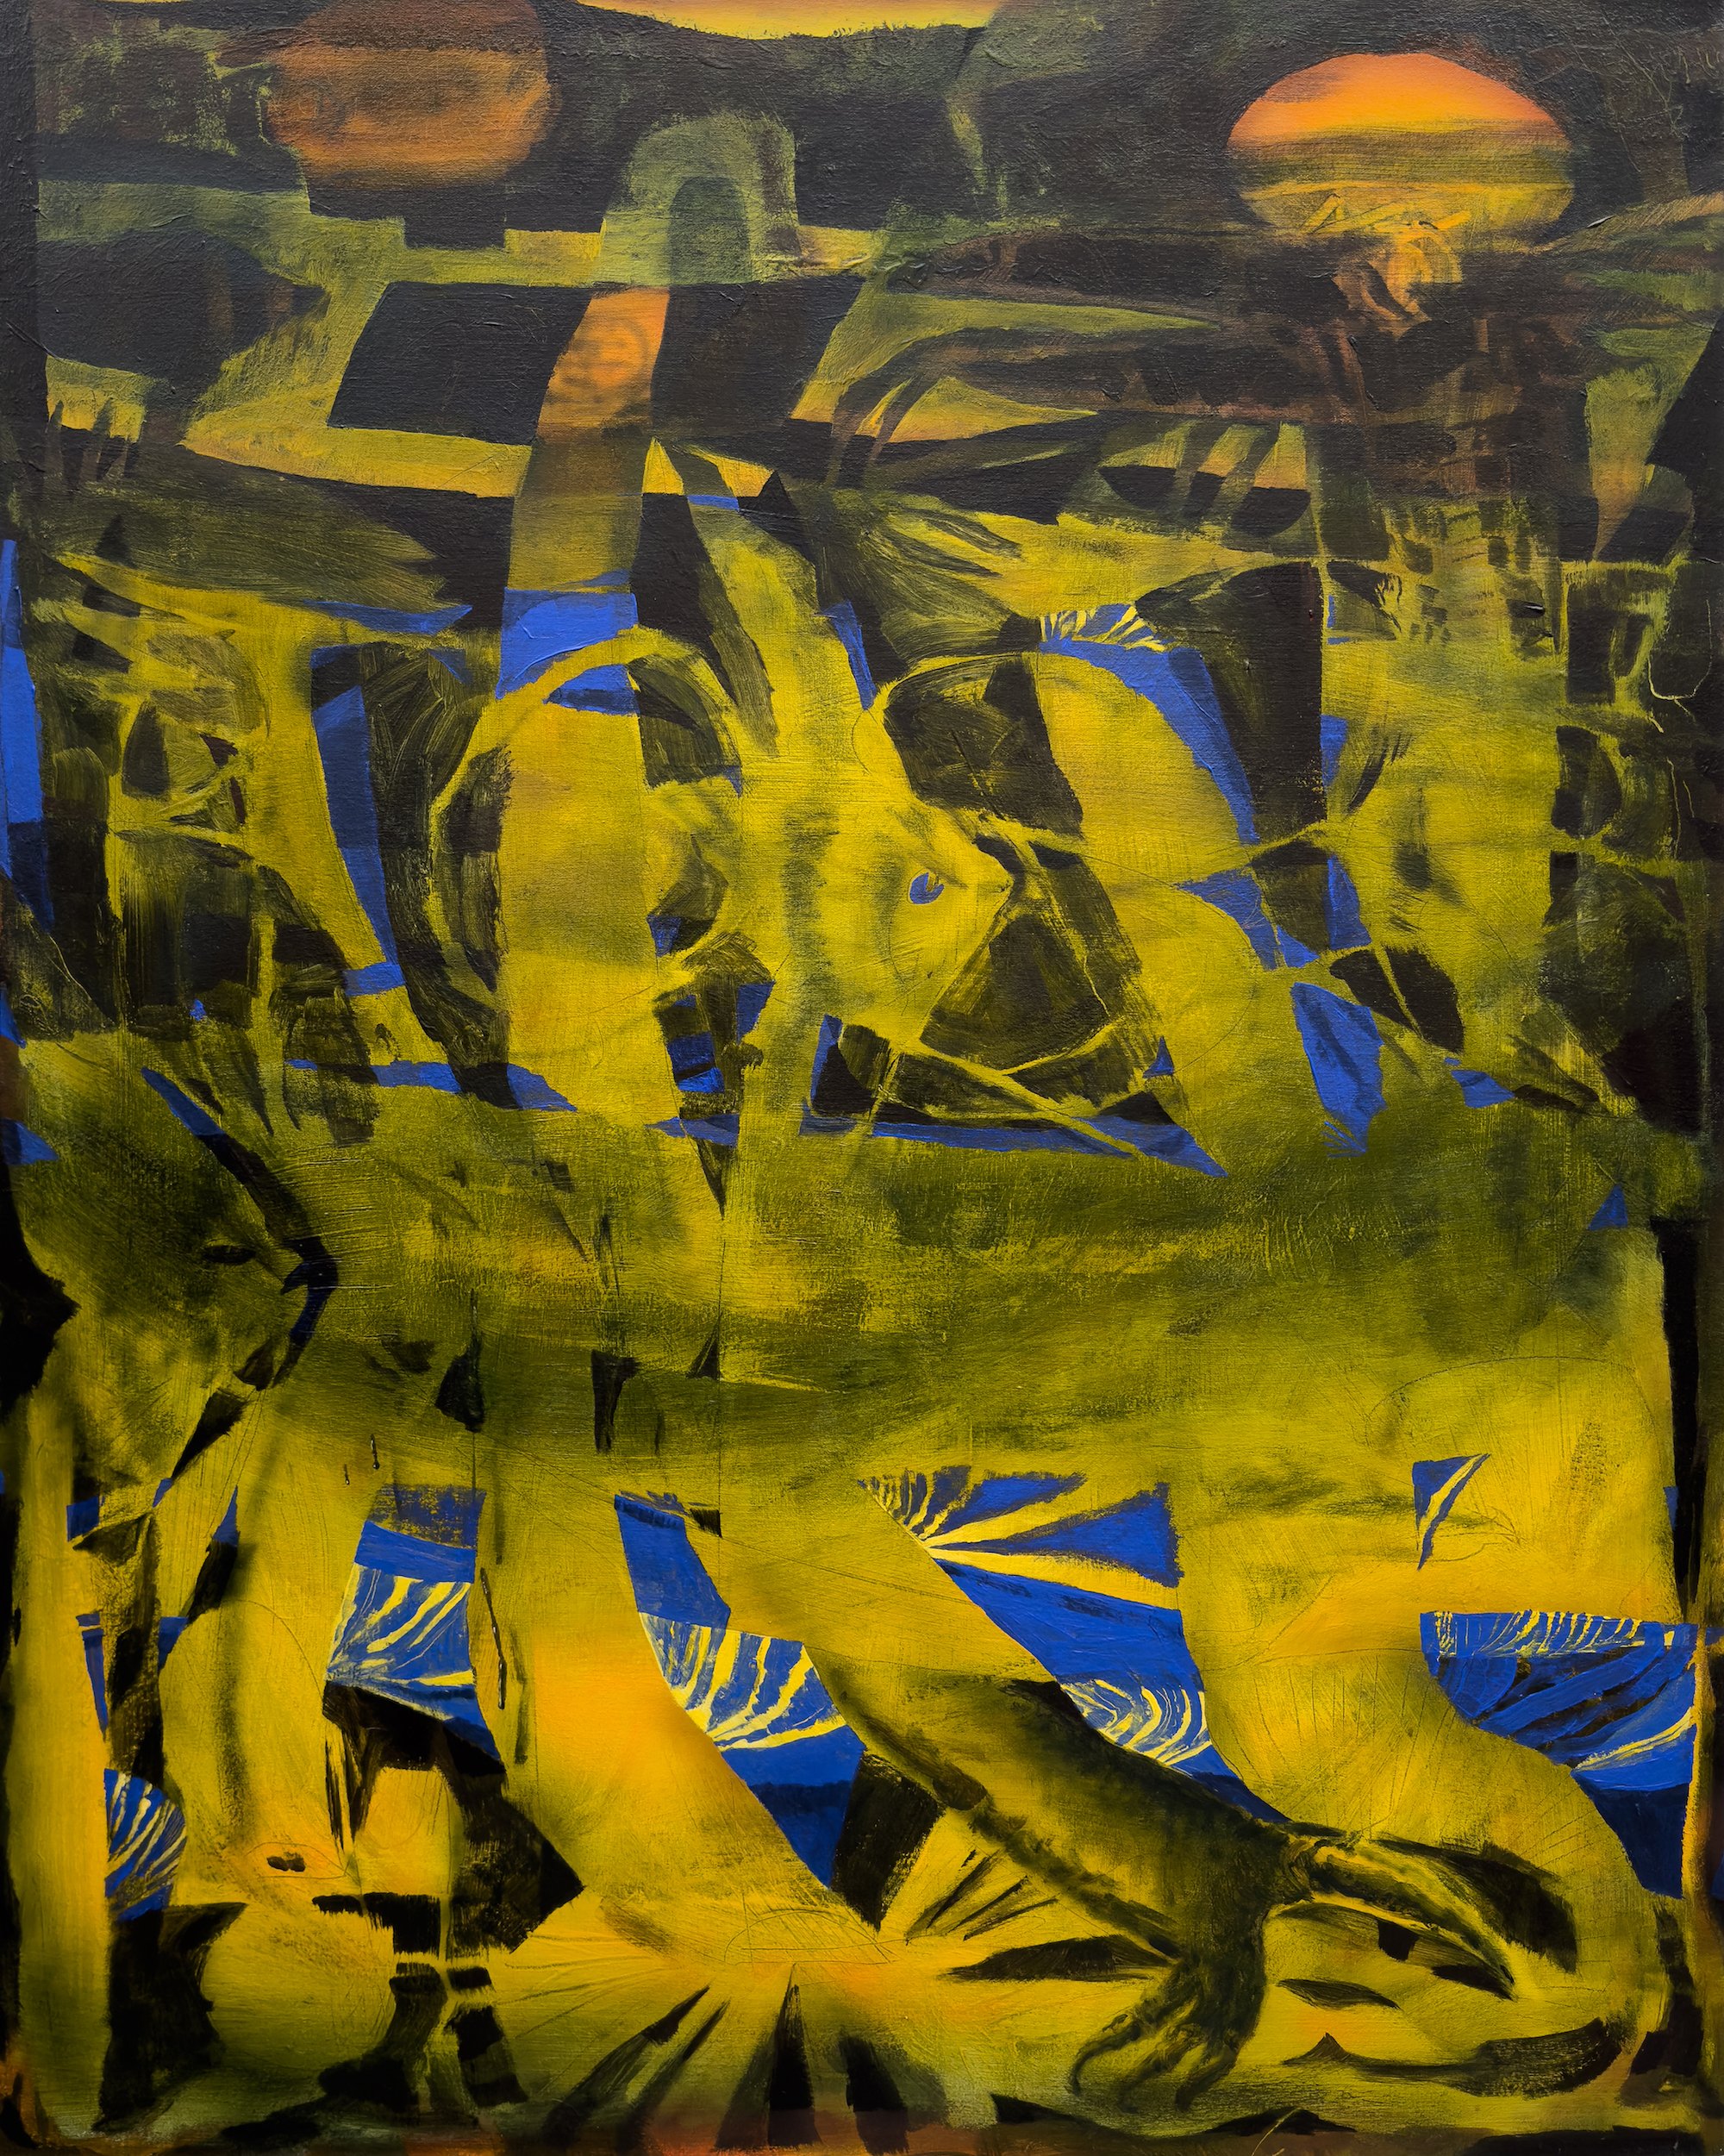 Raymond Hwang | "memorial crossing;  reunion in the sediment", 40 x 32 inches / 101.6 x 81.3 cm, acrylic on canvas, 2023 (Copy)